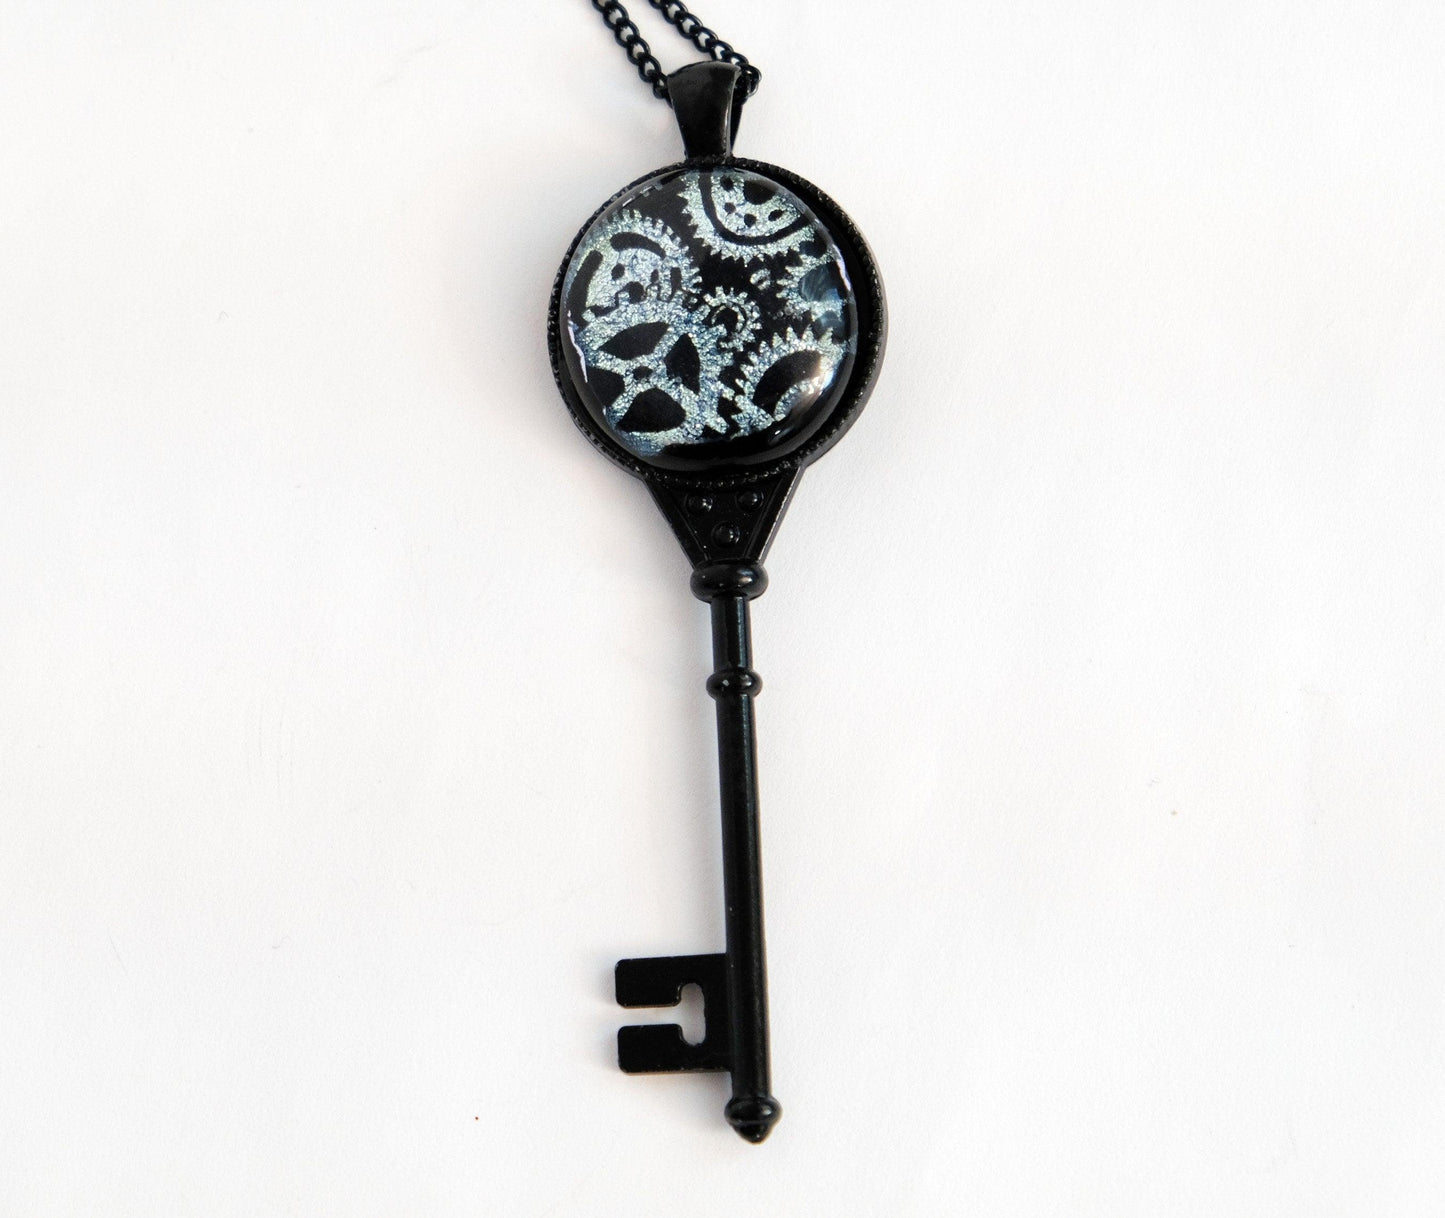 Steampunk Black Metal Skeleton Key pendant necklace with Fused Glass Silver Gears cabochon on 24 inch black chain jewelry seeds glassworks seedsglassworks